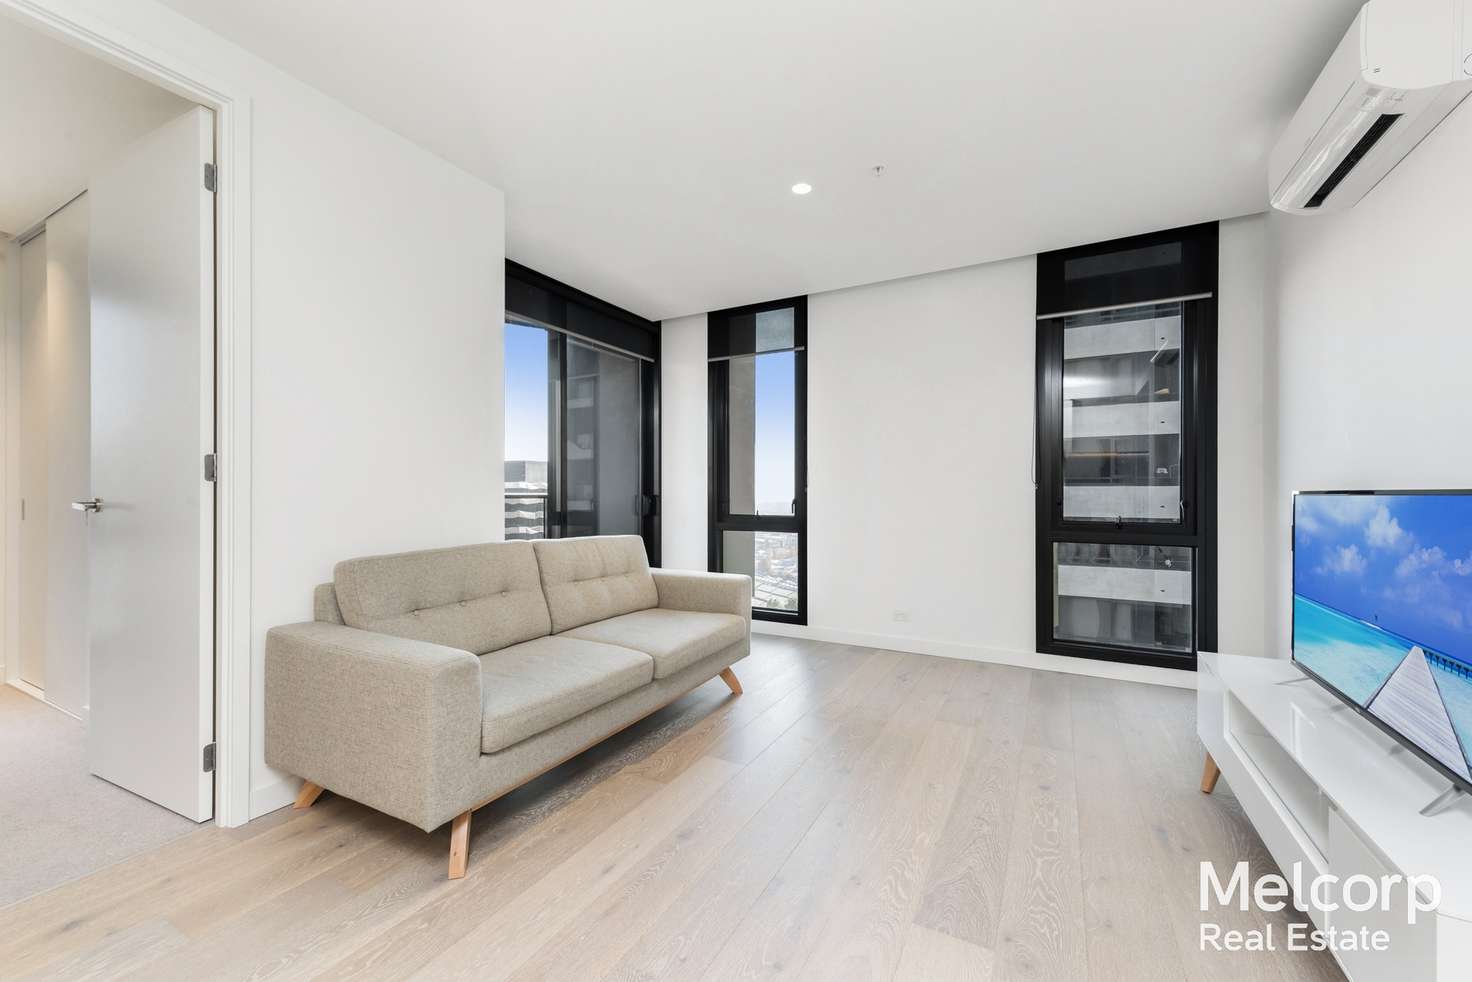 Main view of Homely apartment listing, 2709/81 A'beckett Street, Melbourne VIC 3000